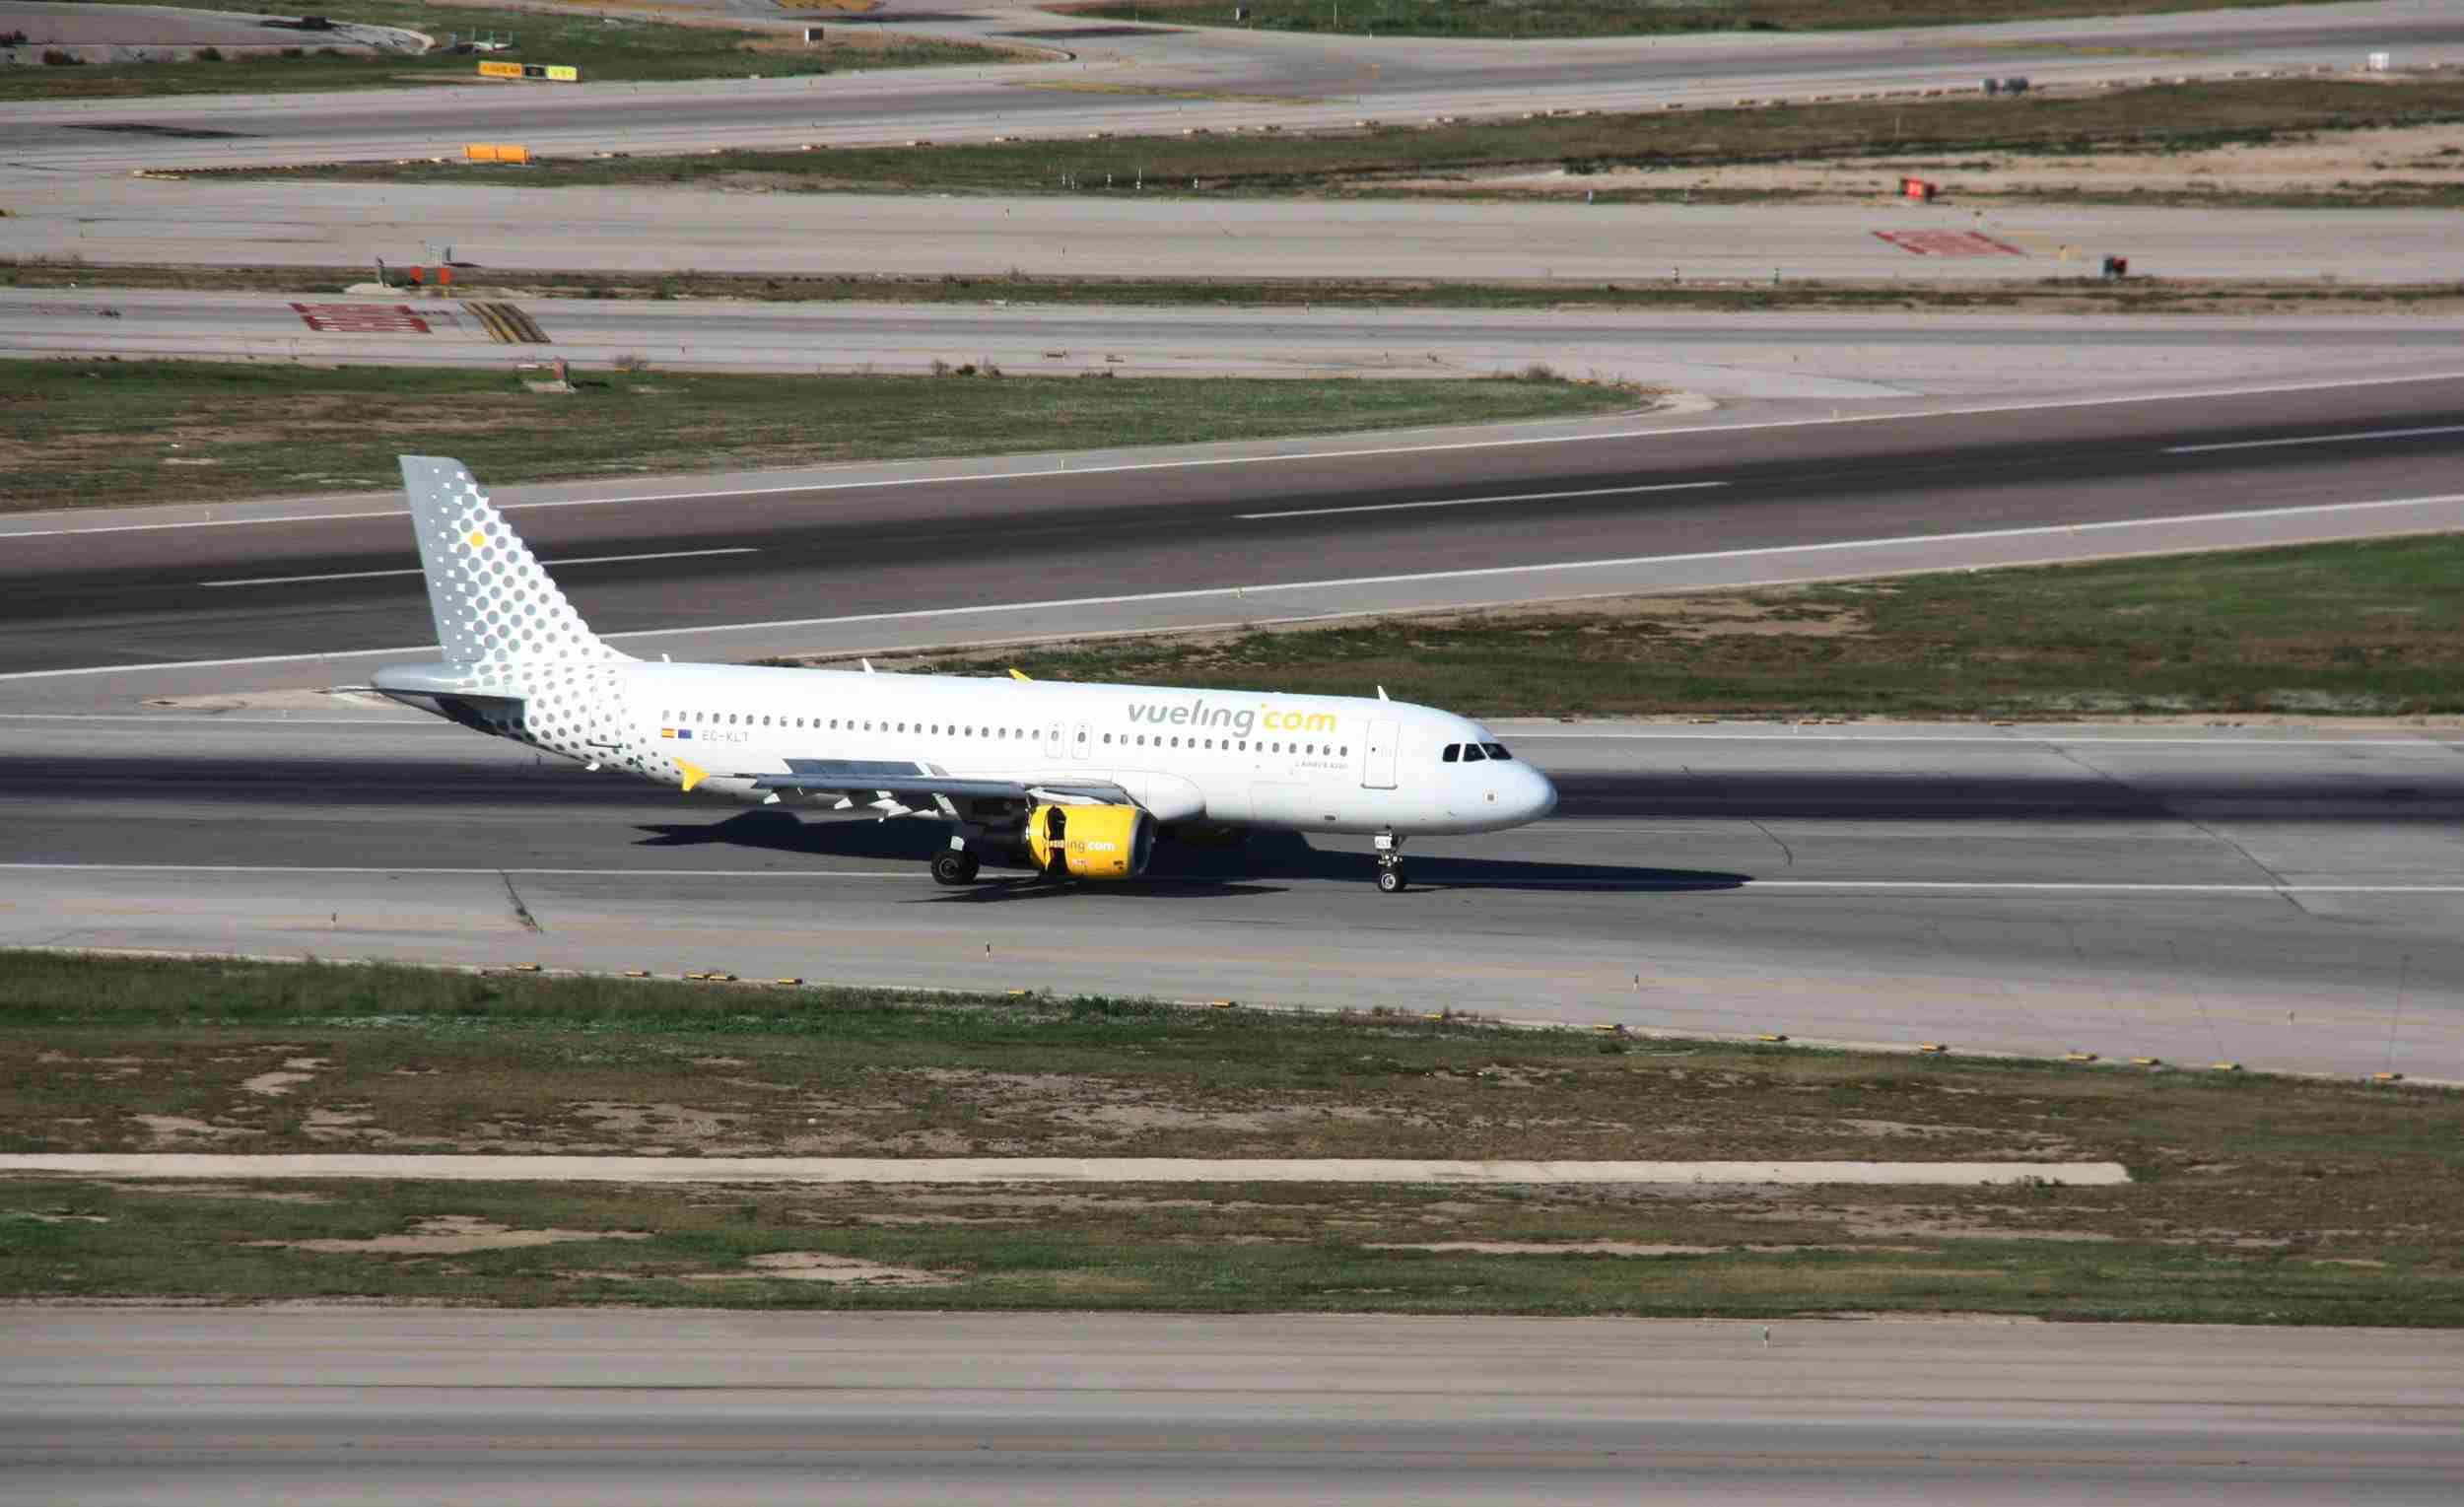 Barcelona demands explanations from Vueling for recent delays and cancellations